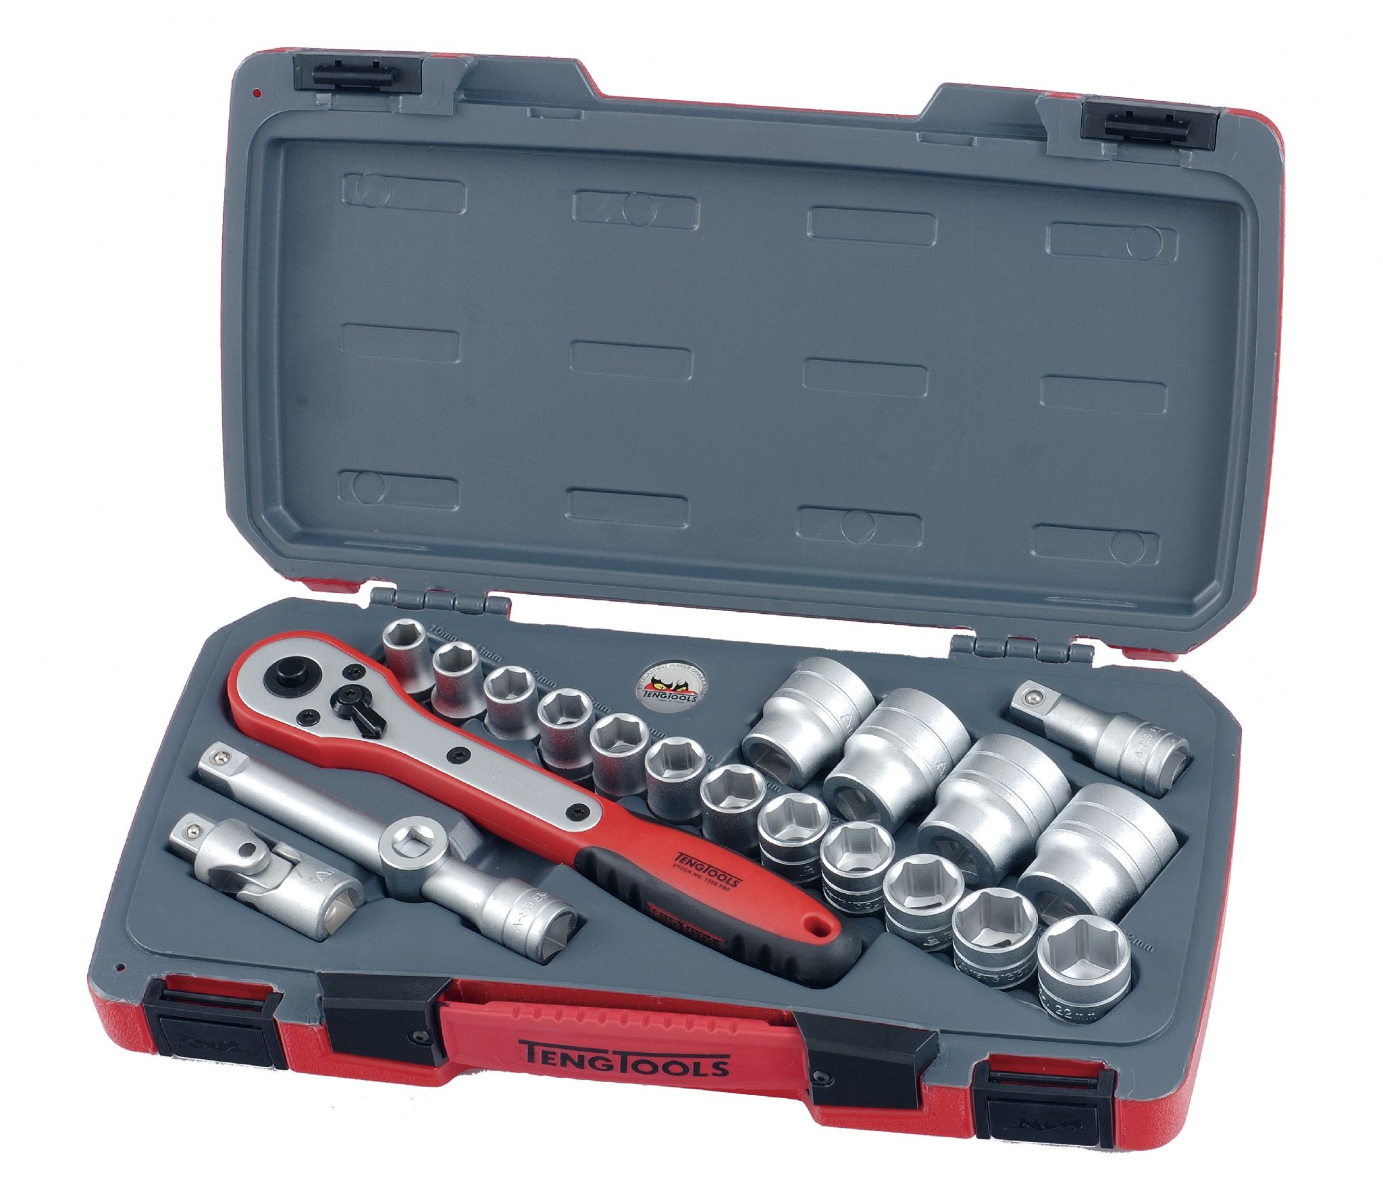 Teng Tools T1221-6 21 Piece 1/2" Drive 6 point Socket Set in storage case